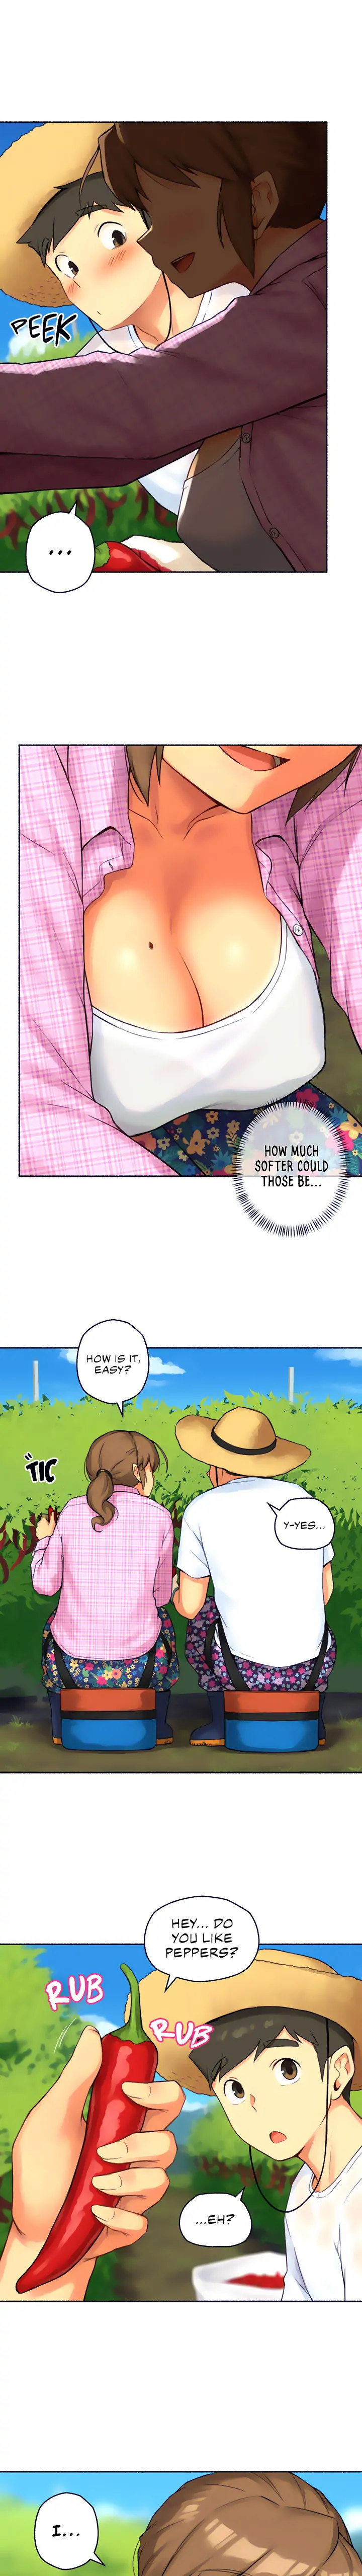 The Memories of that Summer Day - Chapter 2 Page 4